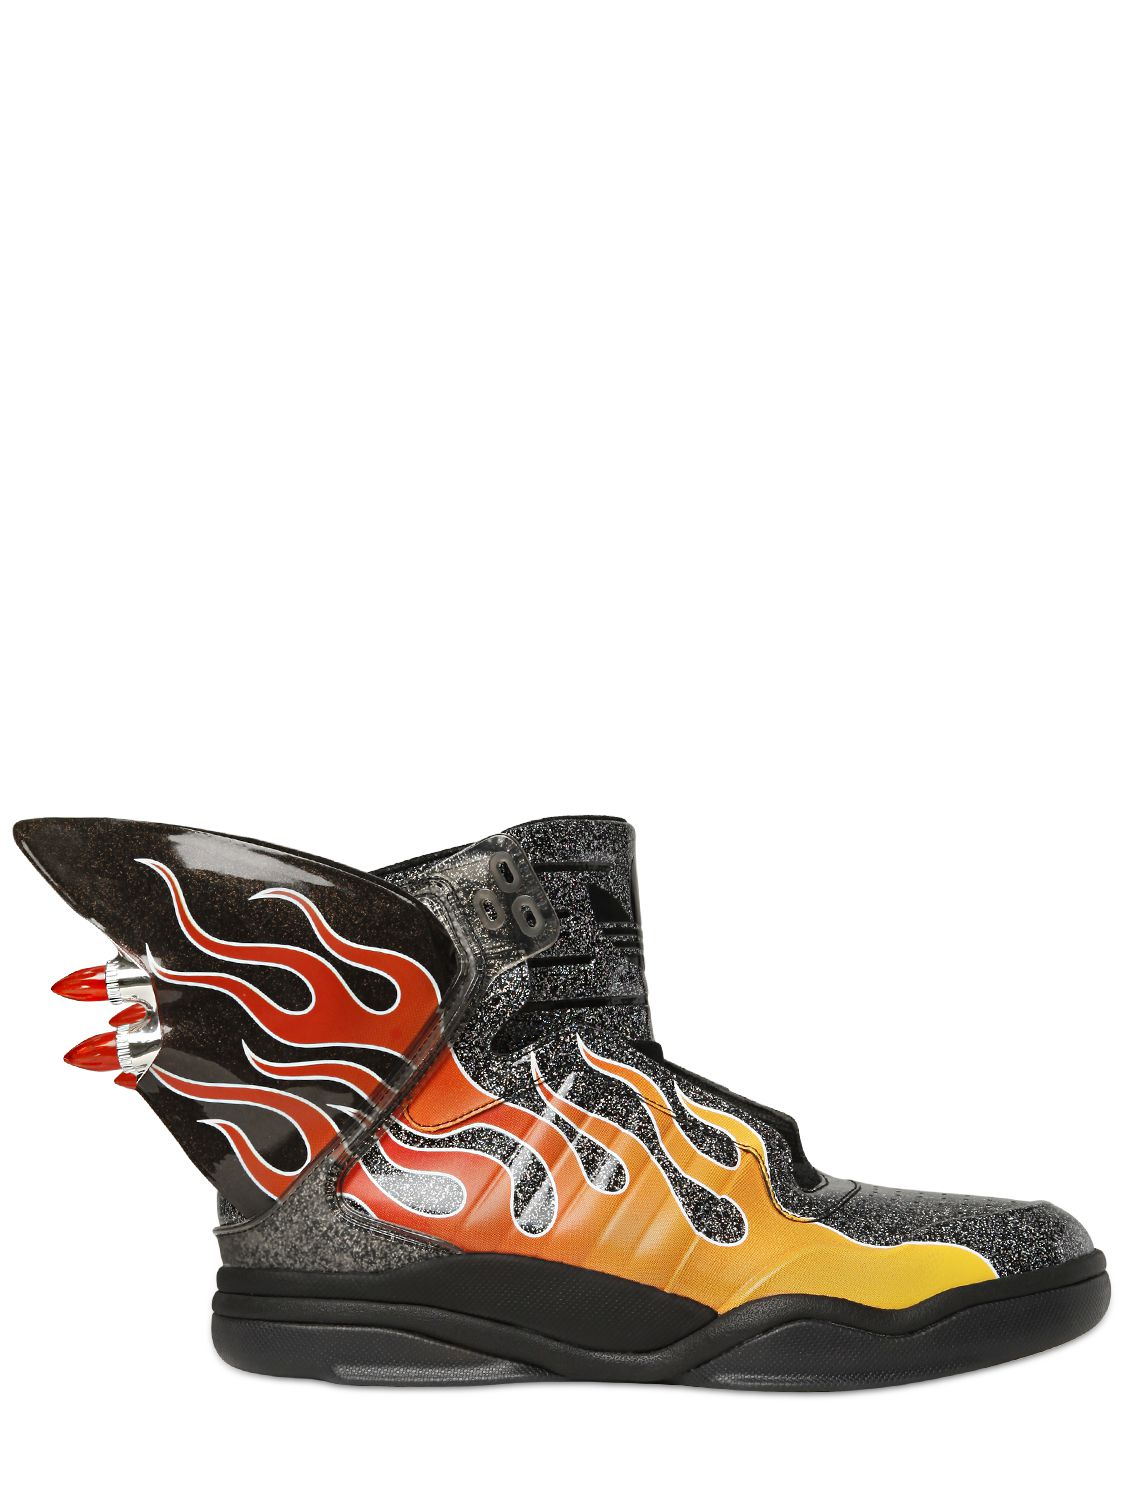 Jeremy Scott for adidas Js Shark Flame Glitter High Top Sneakers in Black -  Lyst